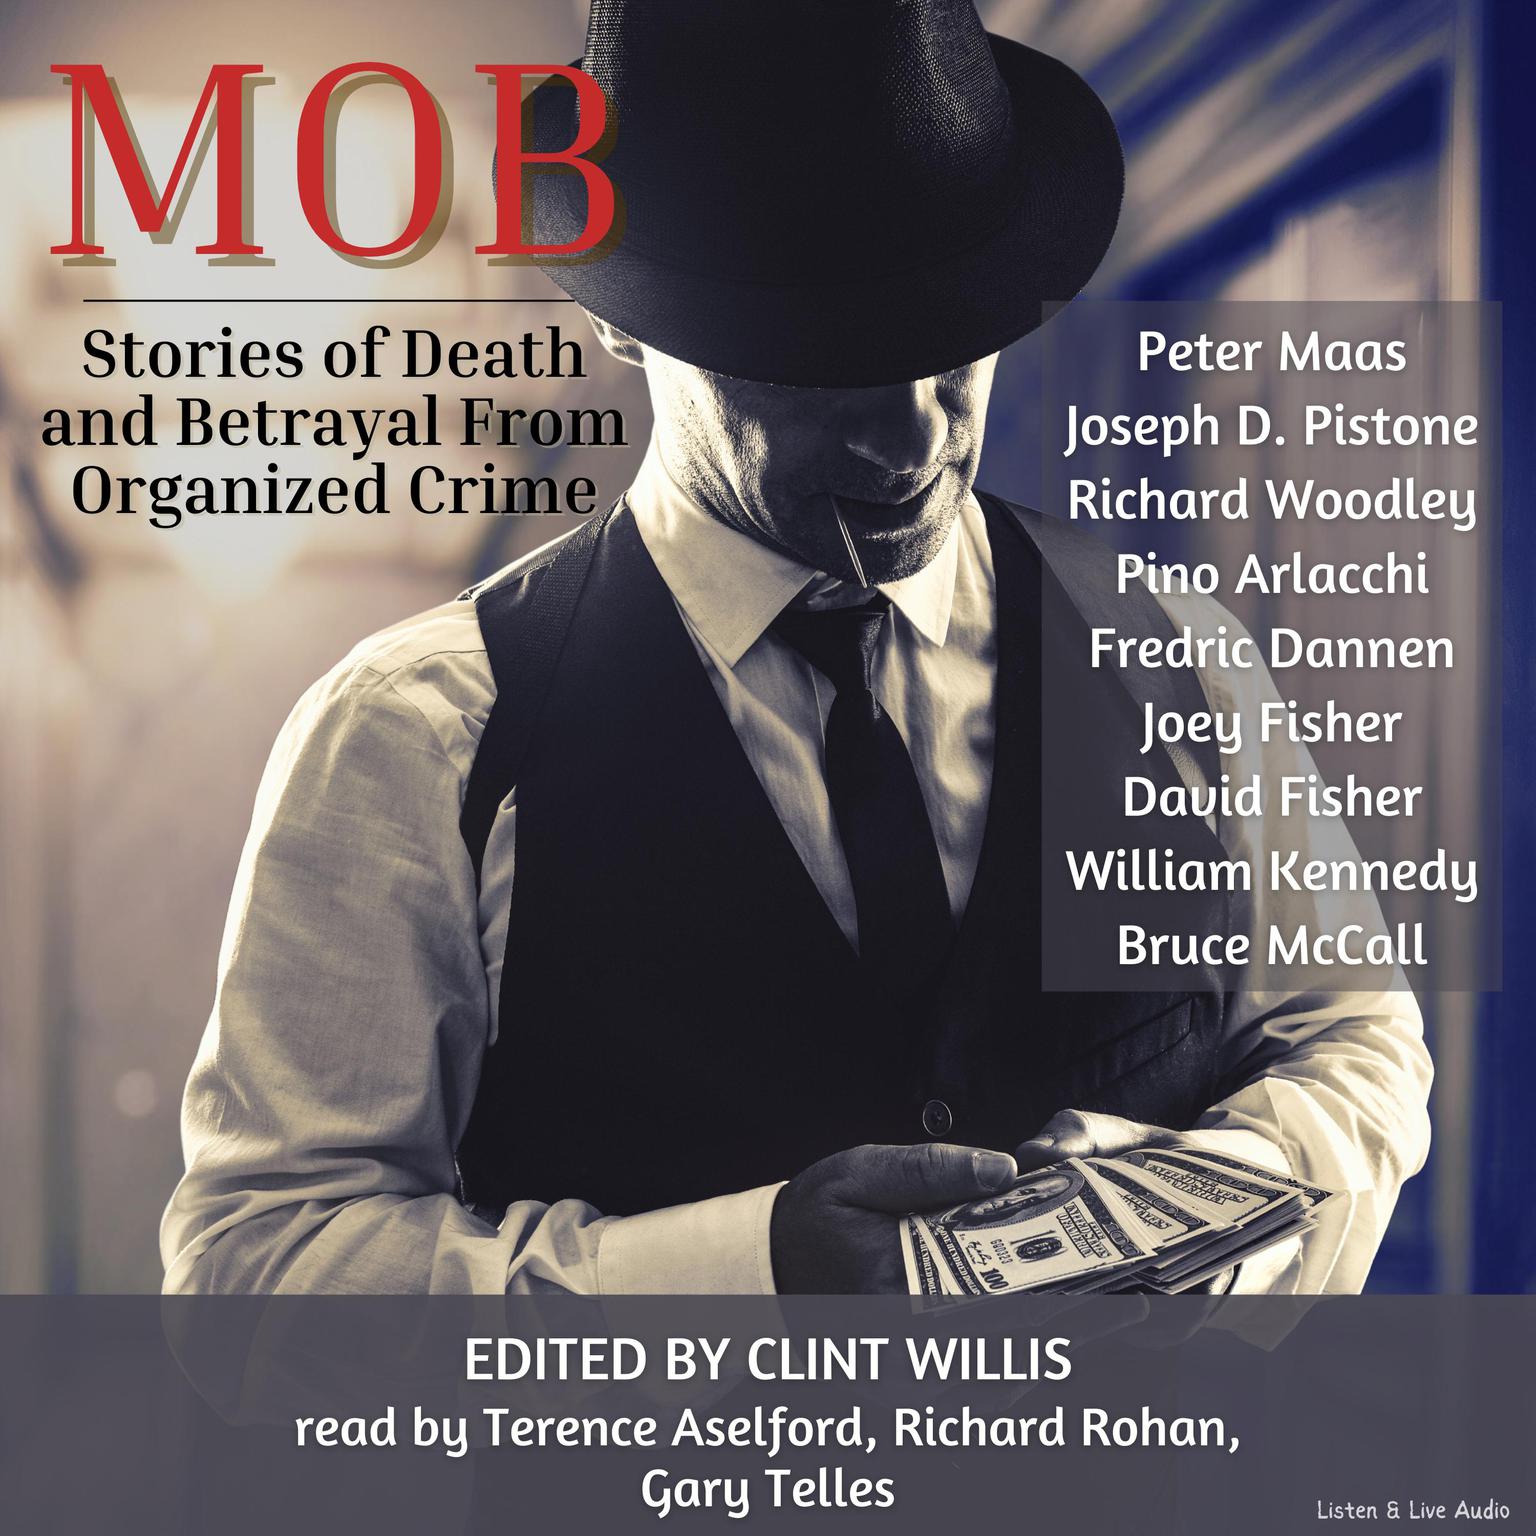 Mob: Stories of Death and Betrayal From Organized Crime: Stories of Death and Betrayal from Organized Crime Audiobook, by David Fisher